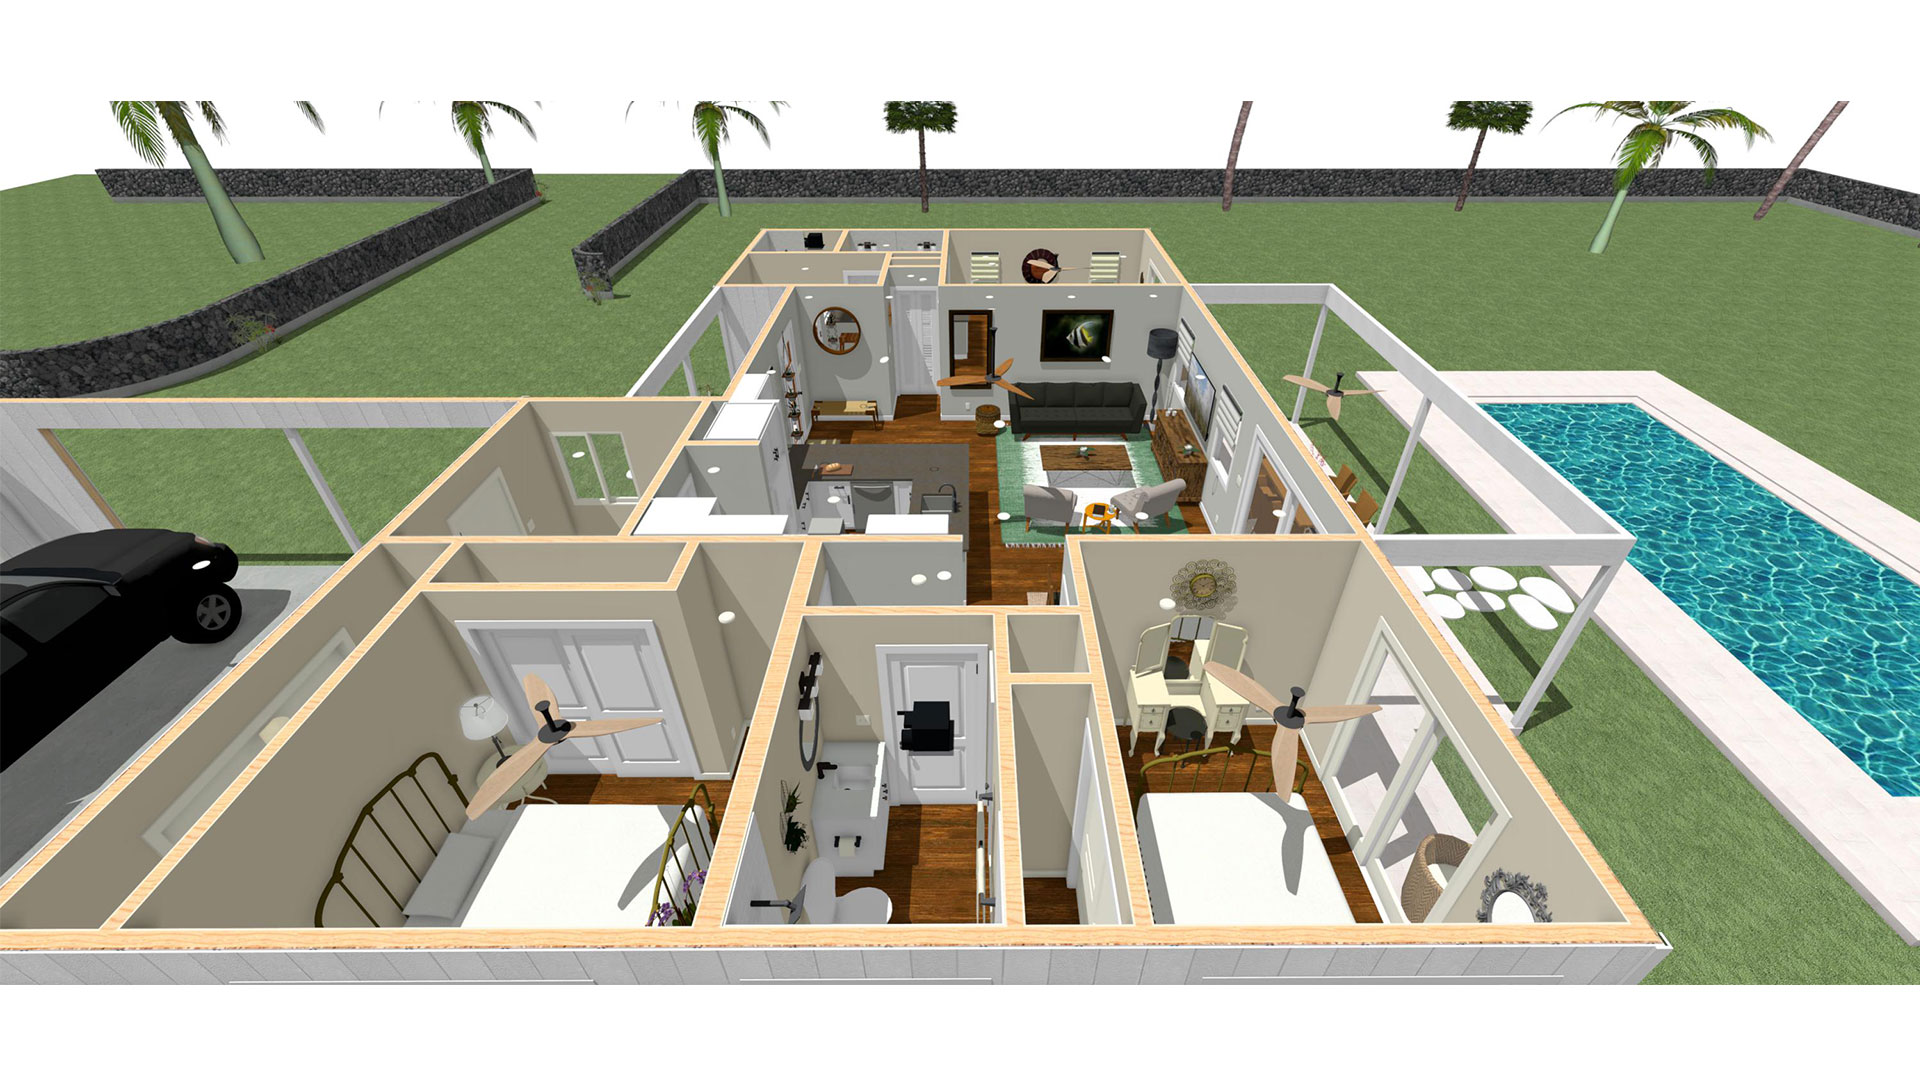 Floor plan view of living room and bedrooms and bathroom